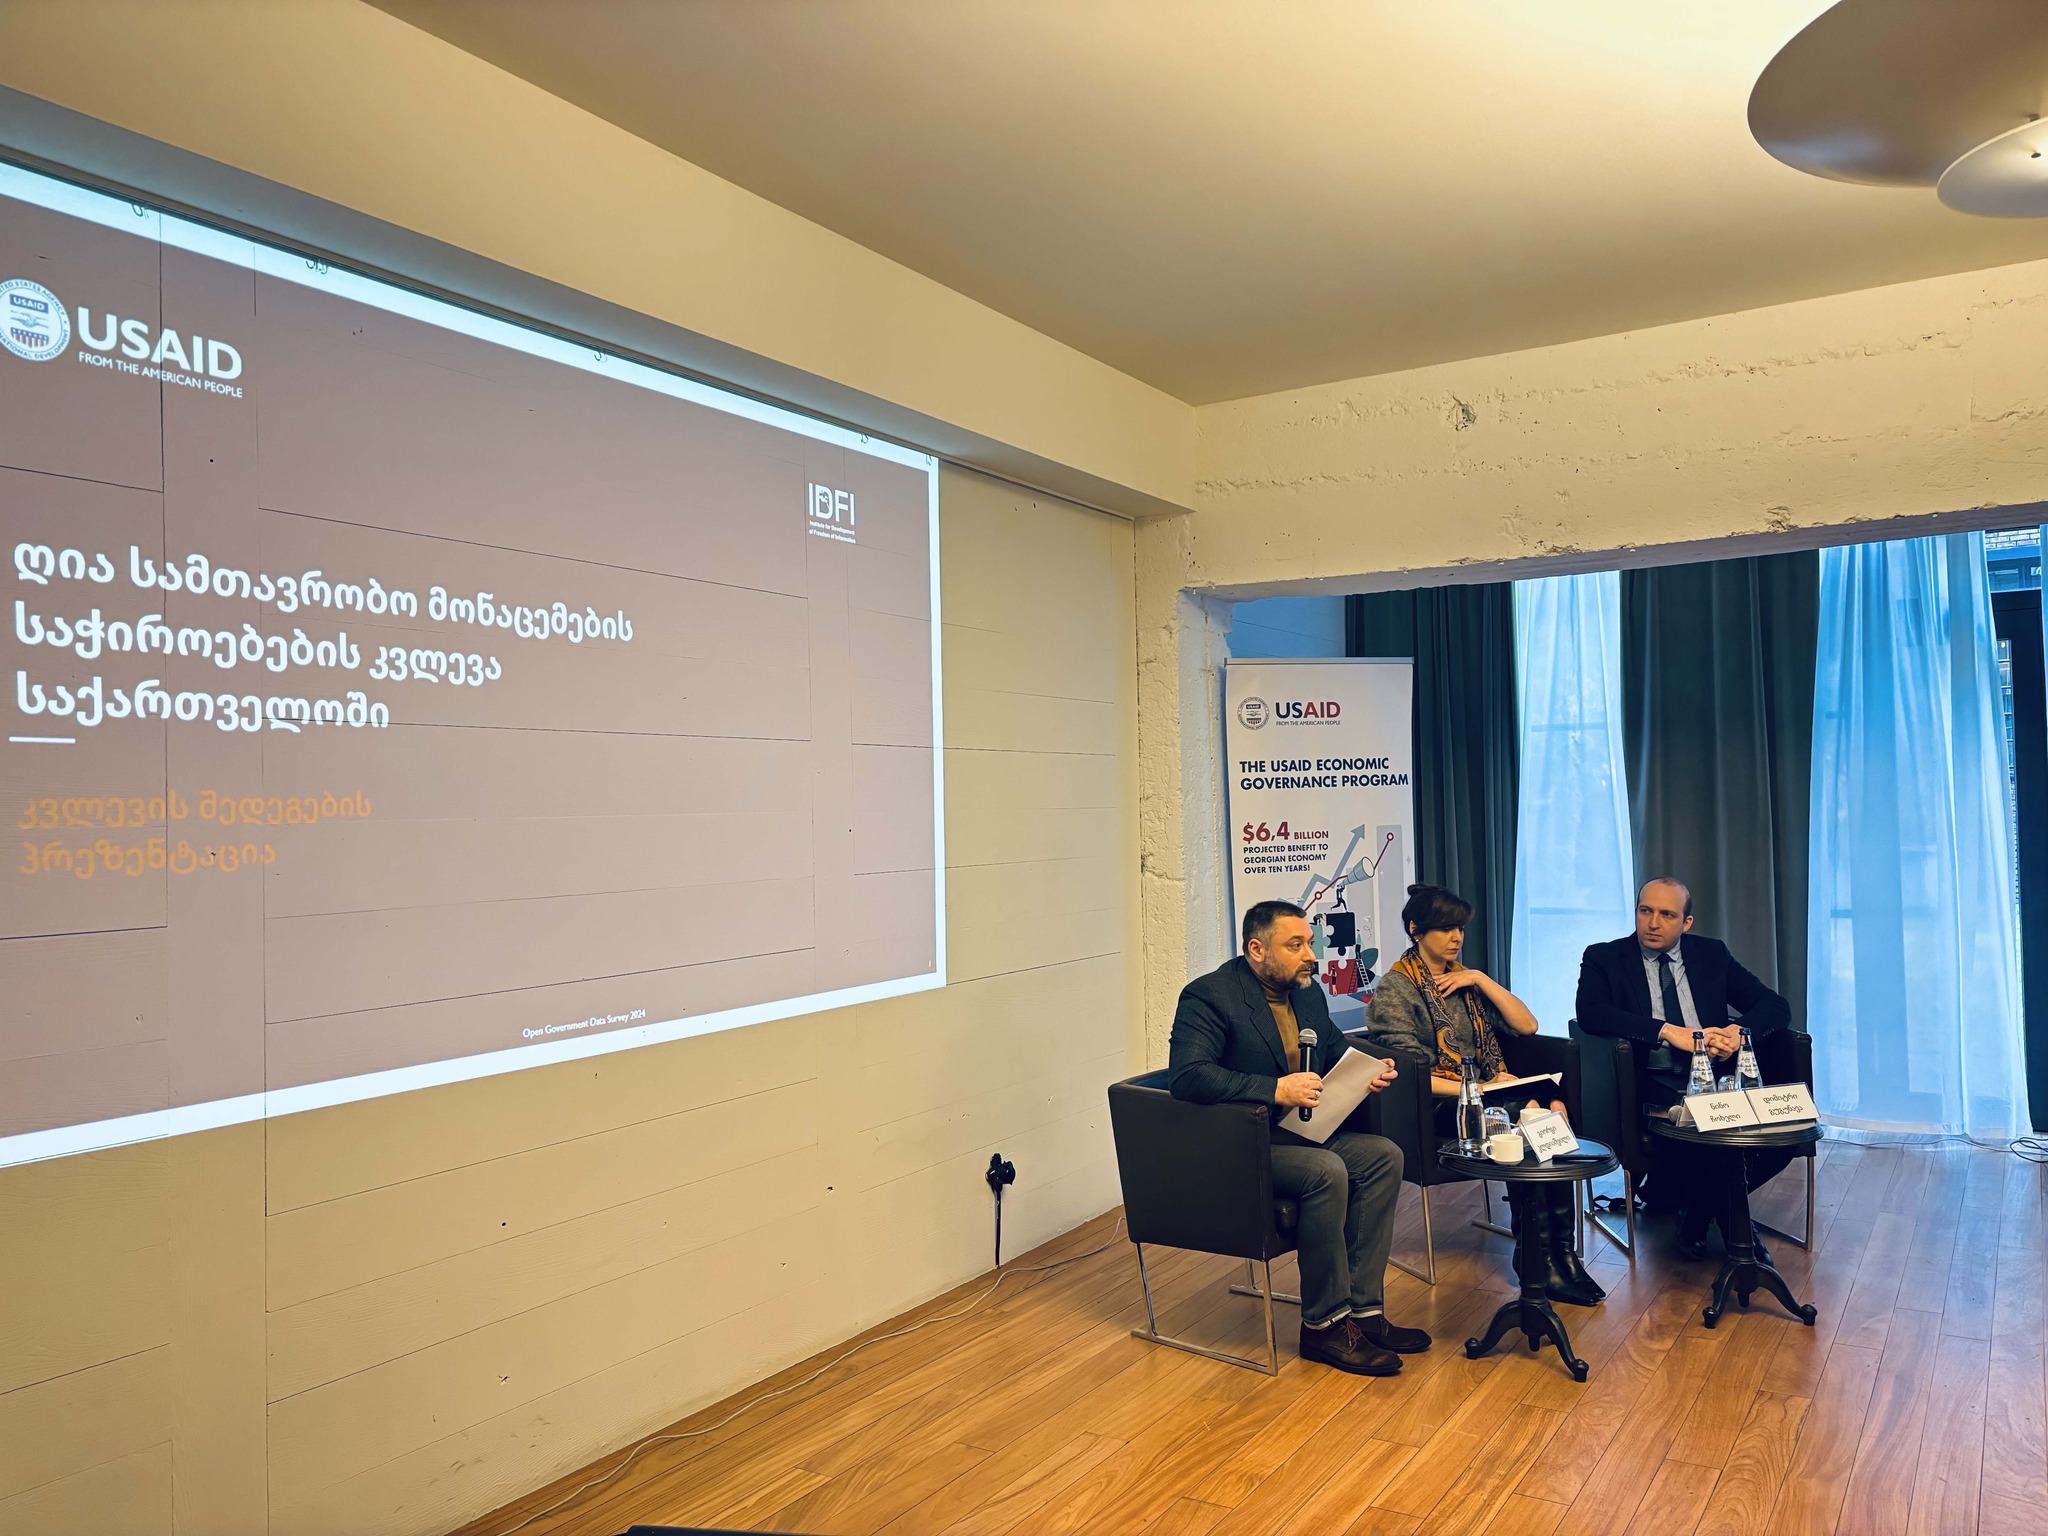  Public-Private Dialogue Held on the Private Sector Needs regarding Open Government Data